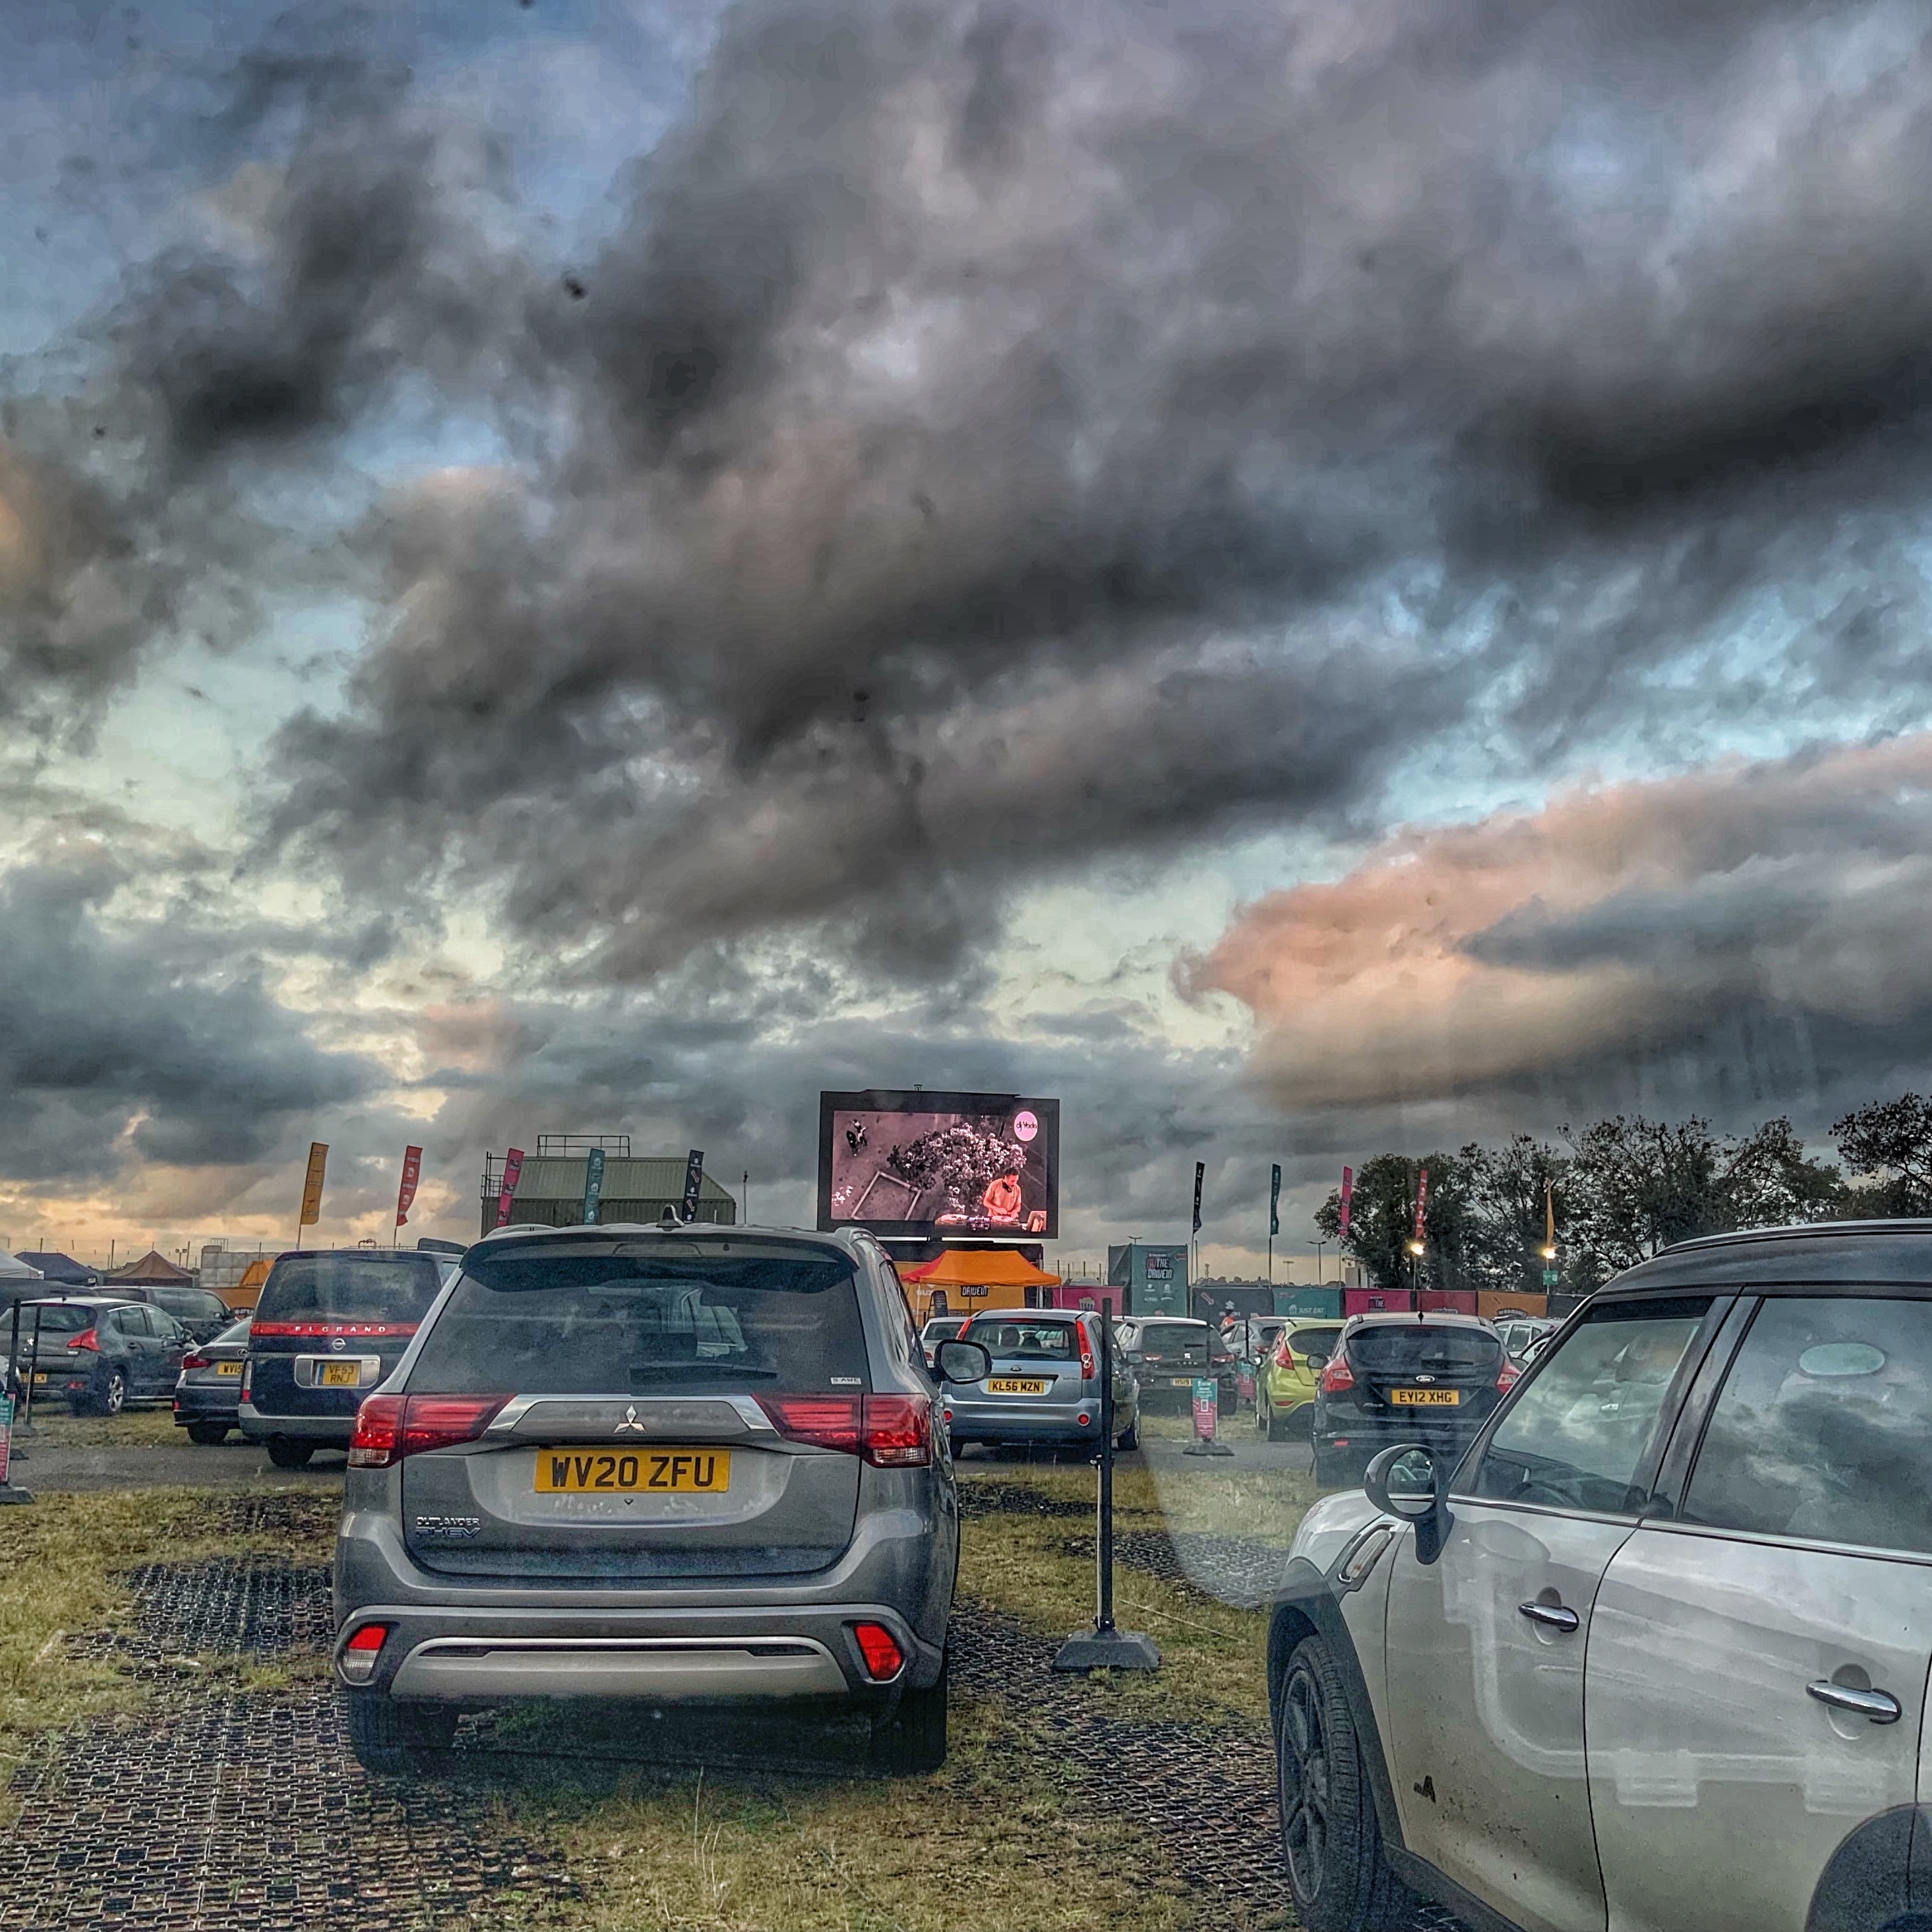 At the drive-in... #366photos2020